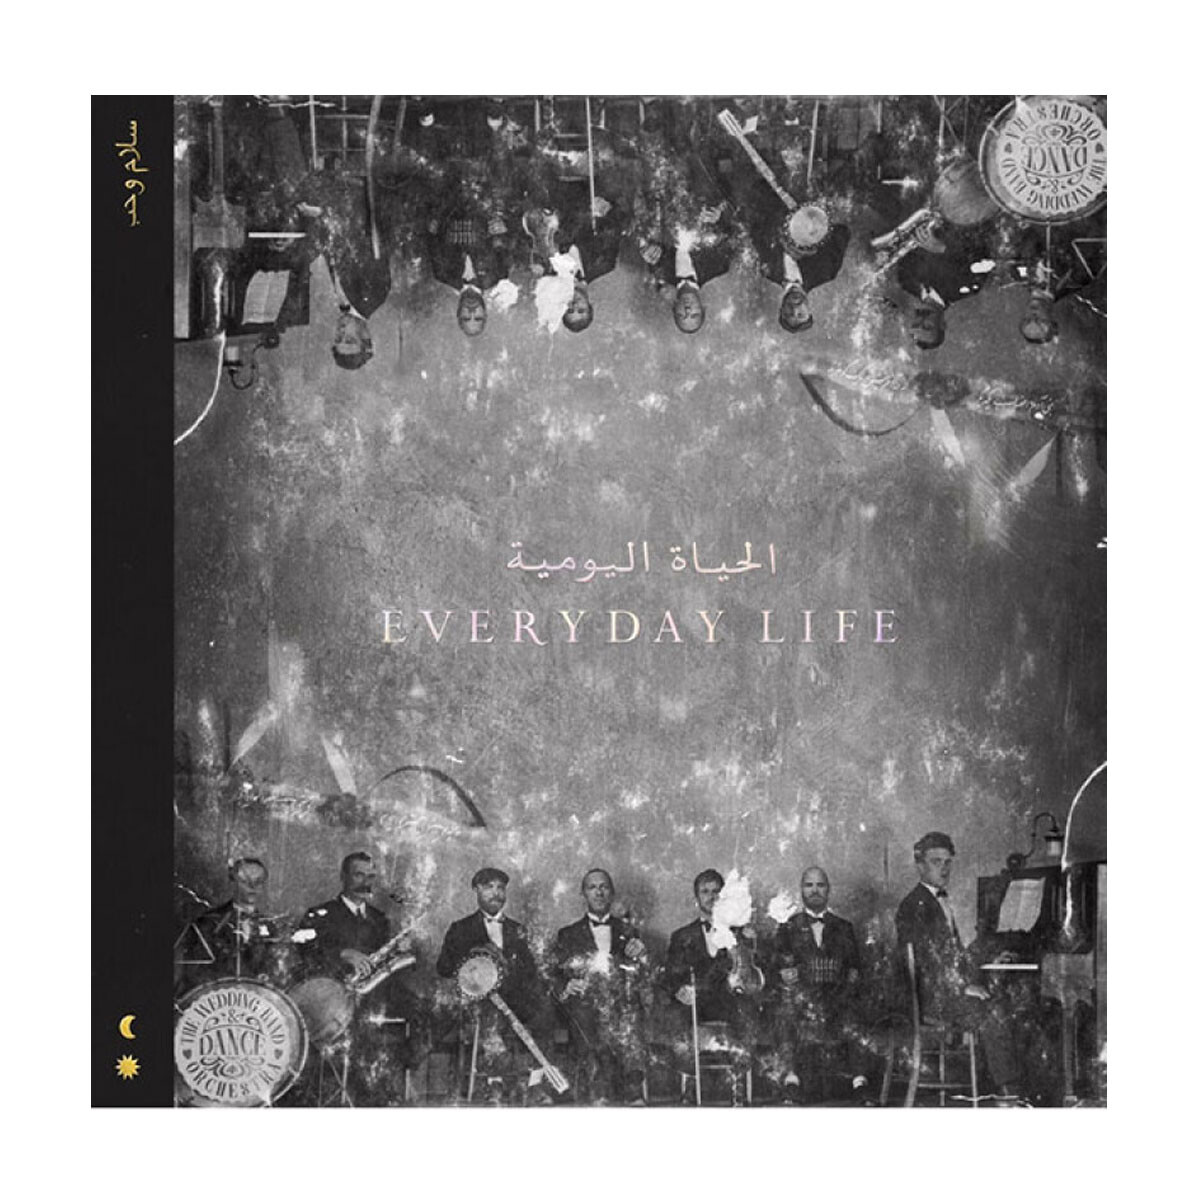 Coldplay - Everyday Life - Vinilo 